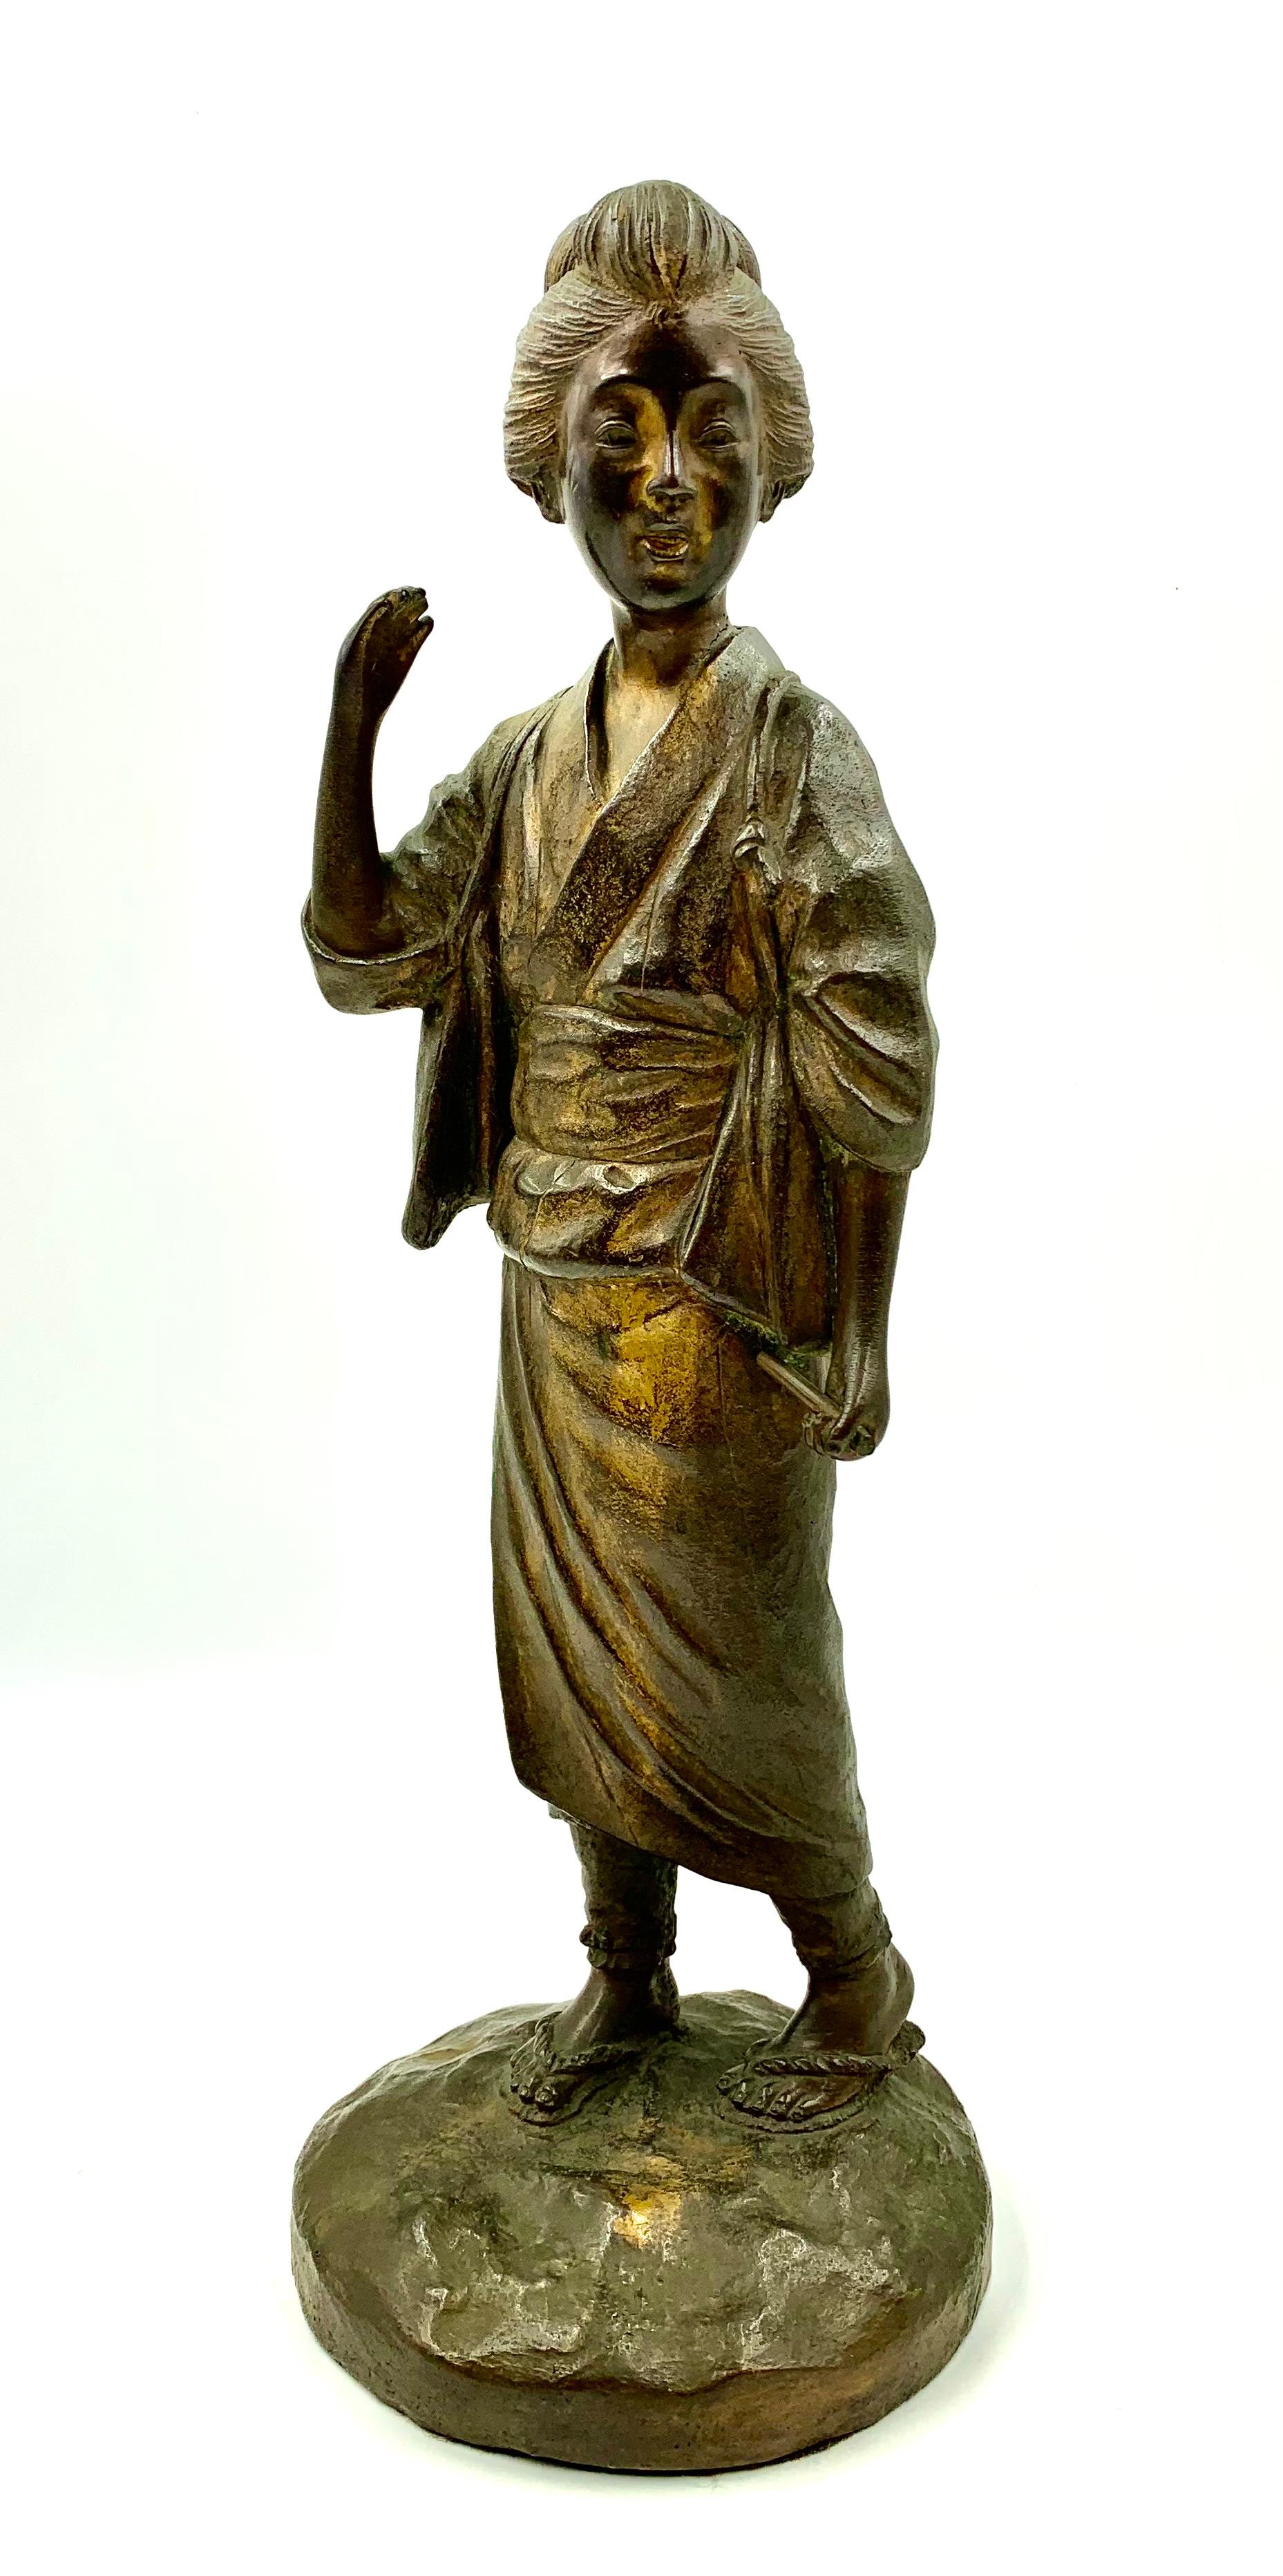 Japanese Meiji period patinated bronze sculpture of a geisha waiving her hand in greeting signed Genryusai Seiya
19th Century
The attractive young geisha is dressed in traditional Japanese kimono and beautifully woven sandals. Her hair is done up in